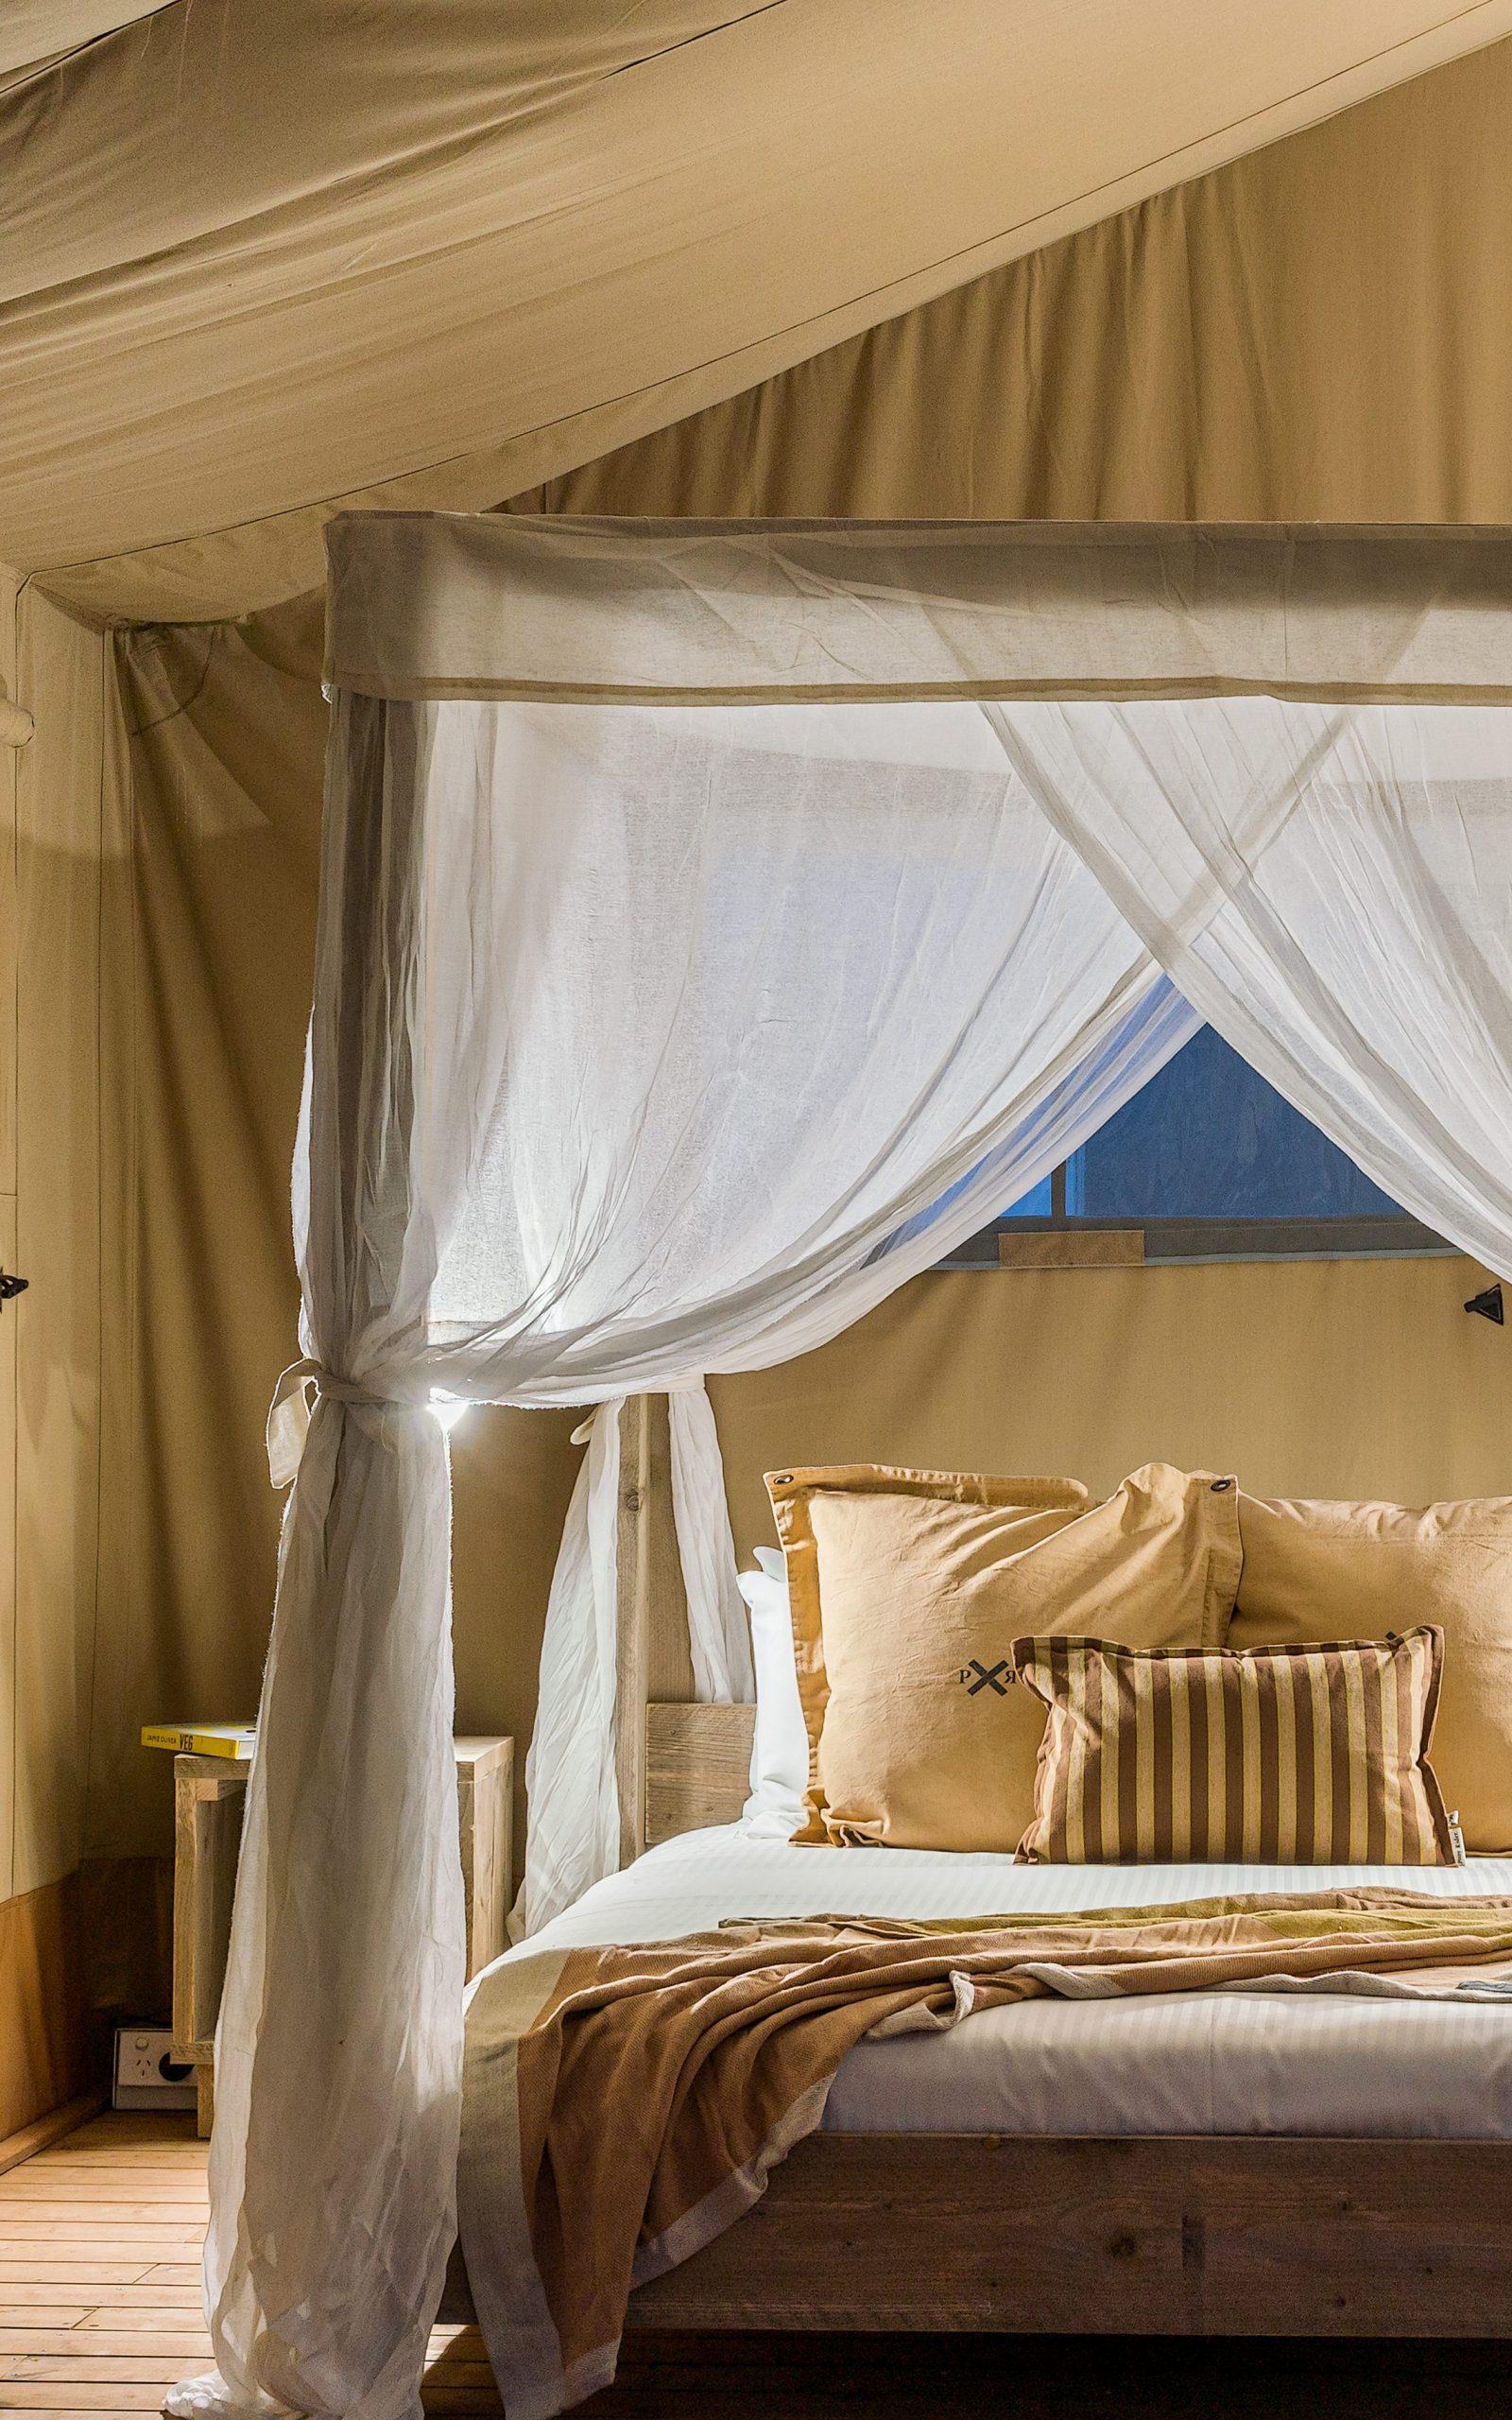 Escape to an Australian coastal wonderland, with canopy bedding & spacious glamping tents.